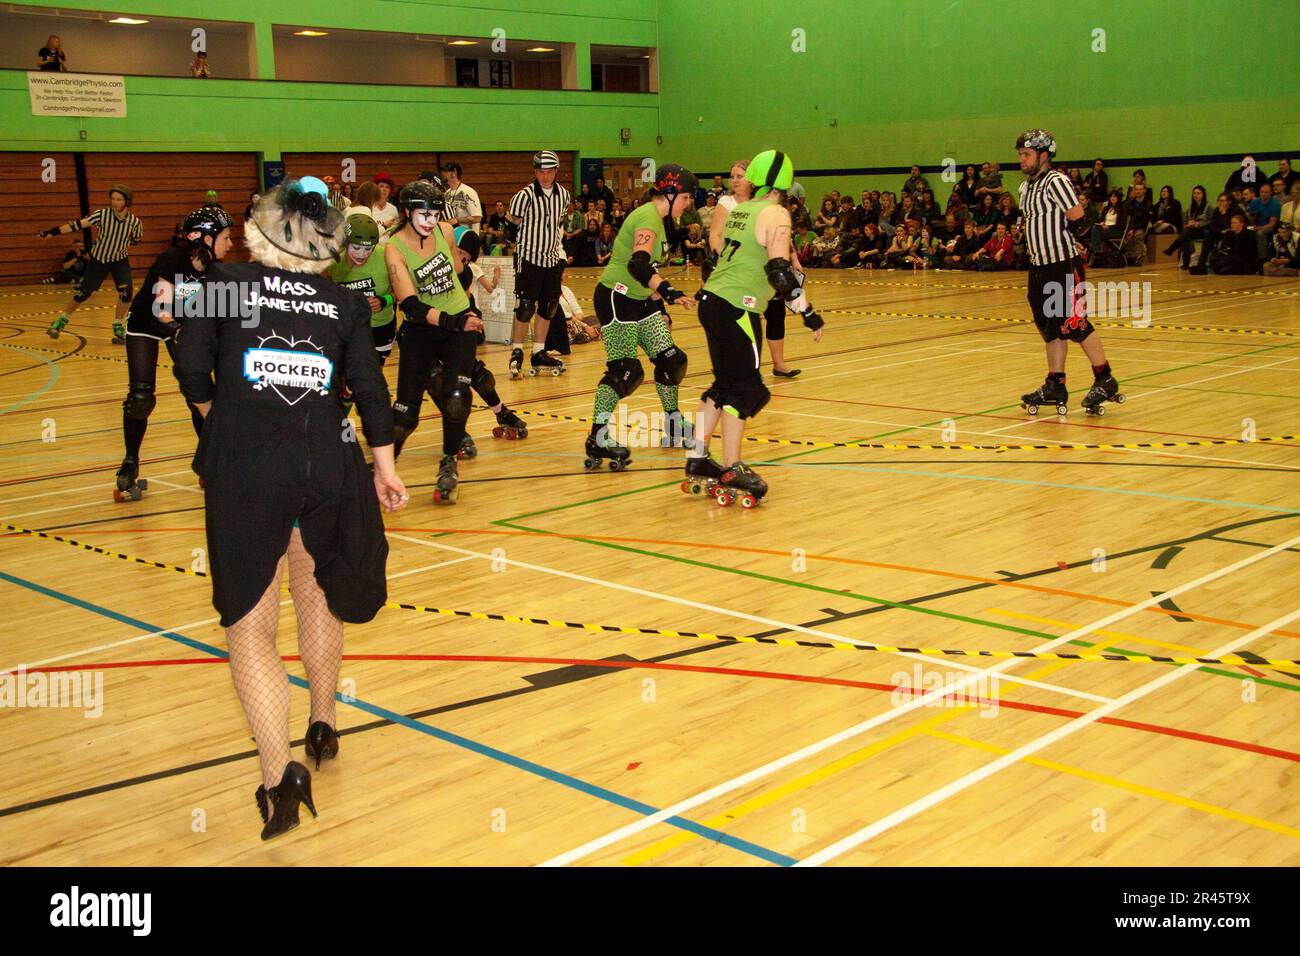 Highly involved Brighton Rockers coach Mass Janeycide at a roller derby bout in the Kelsey Kerridge sports centre Cambridge Stock Photo